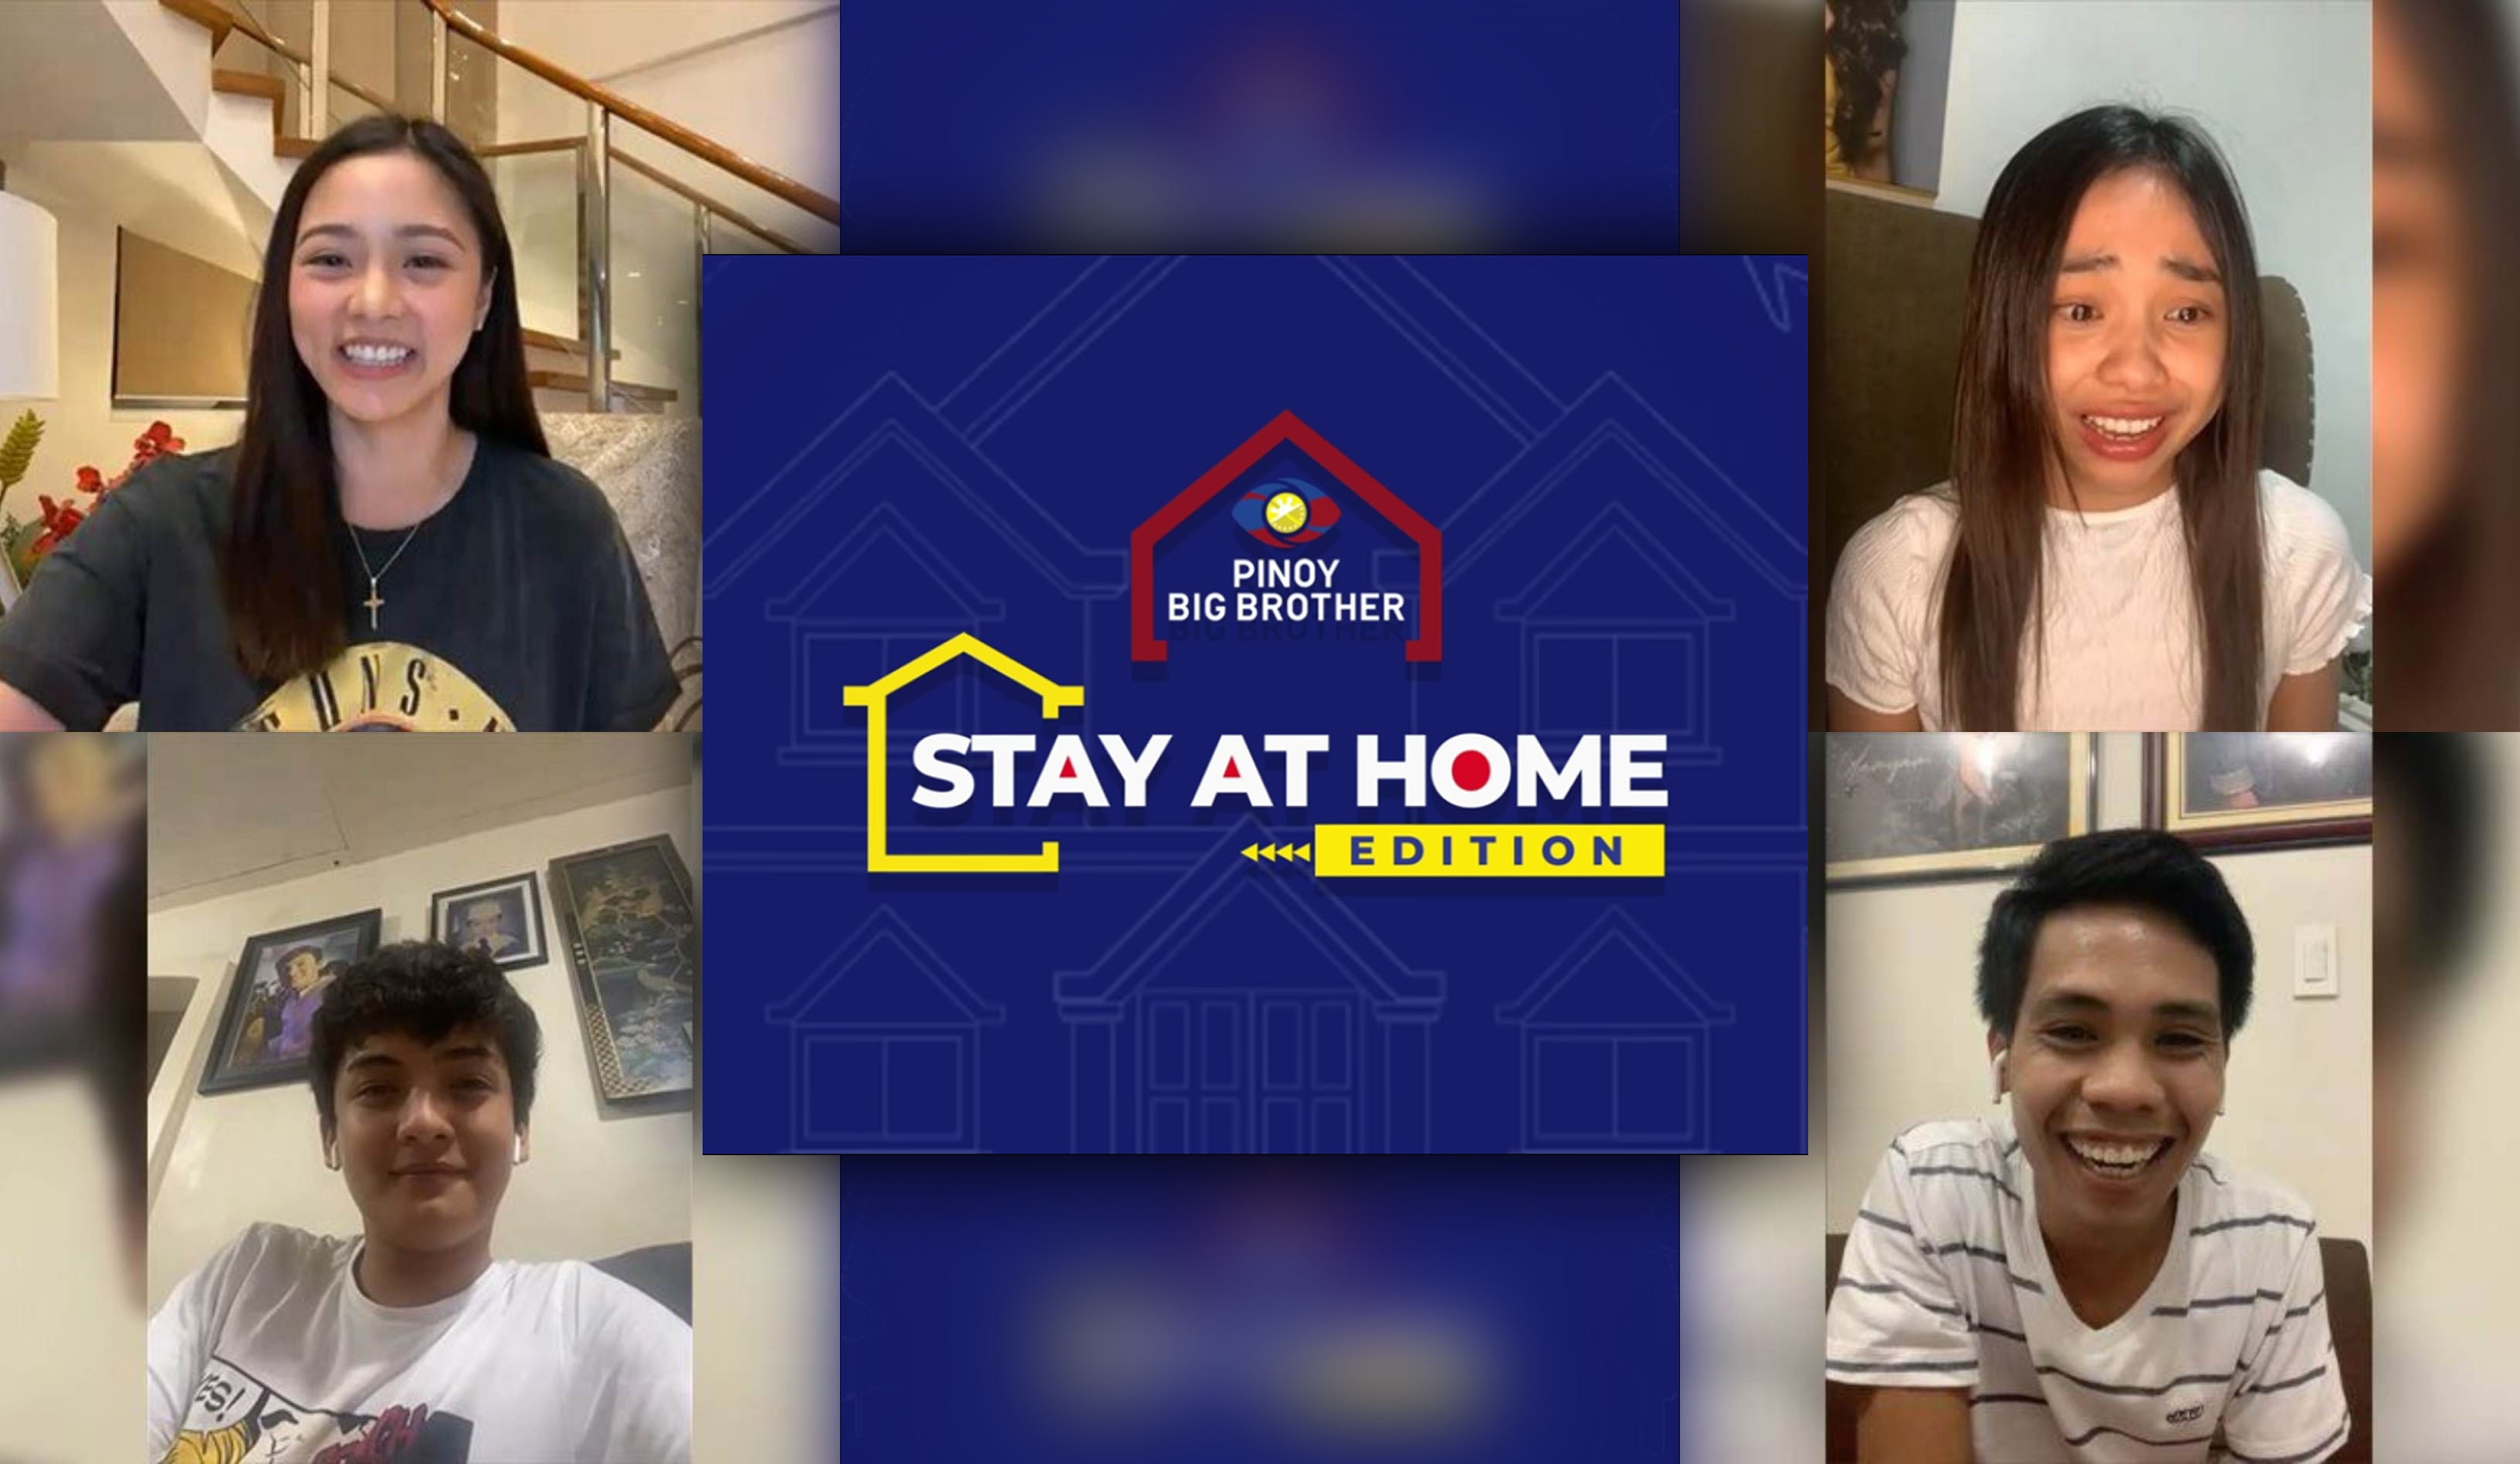 "Pinoy Big Brother: Stay At Home Edition" highlights importance of staying at home amid COVID-19